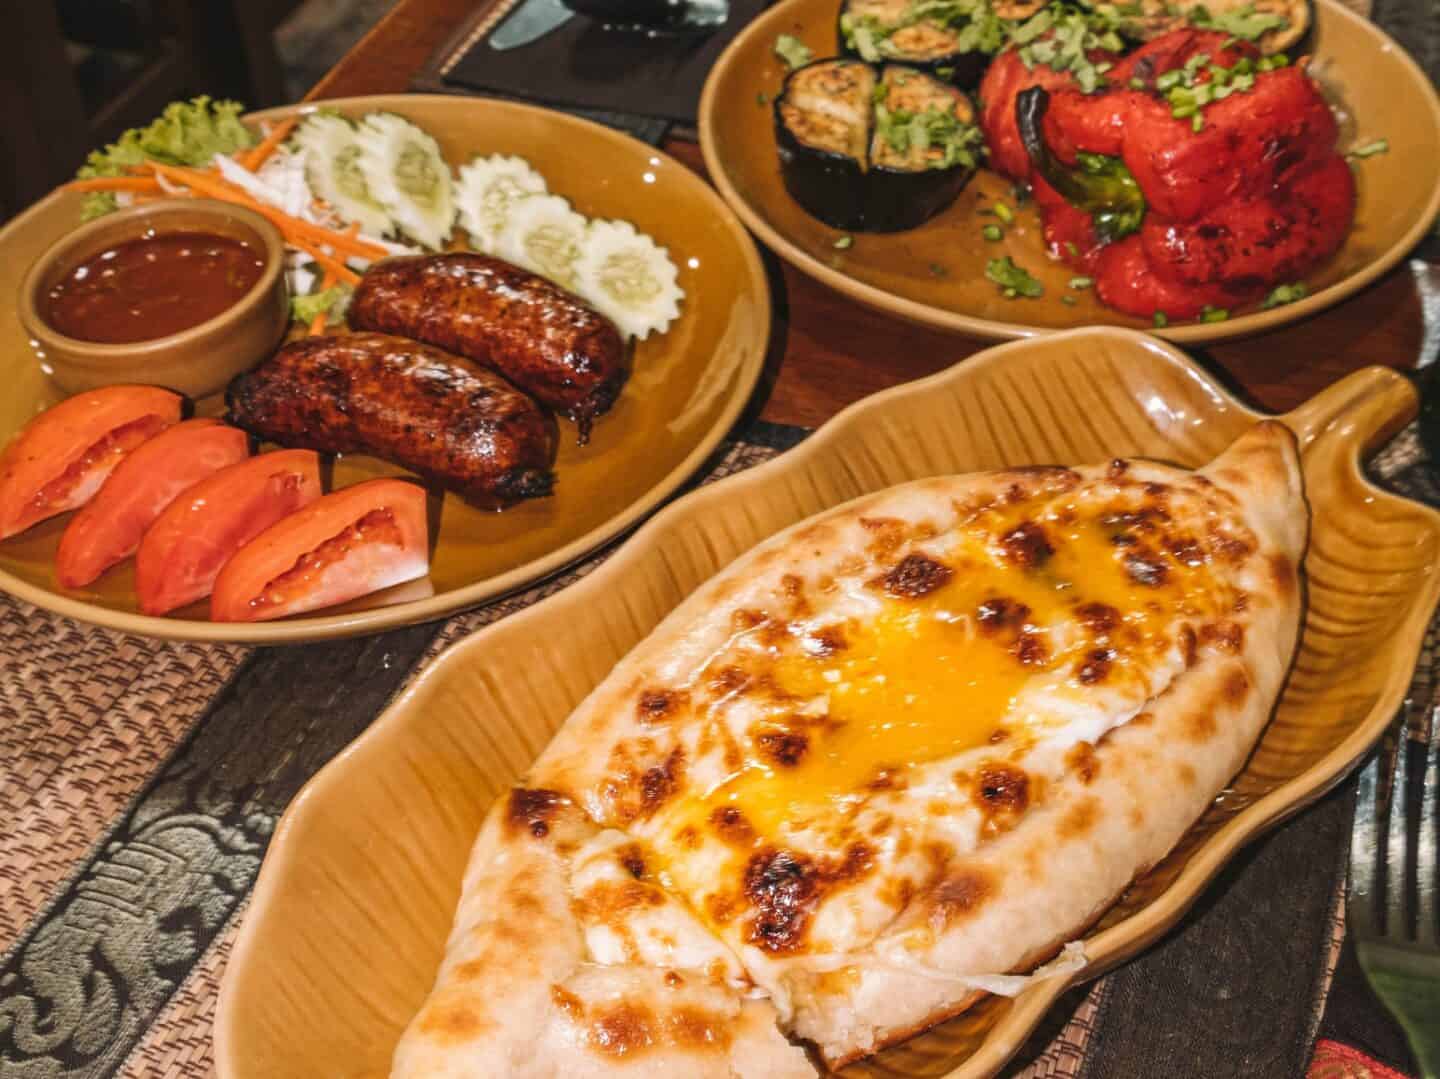 Khachapuri from Georgia Restaurant is some of the best food in Patong